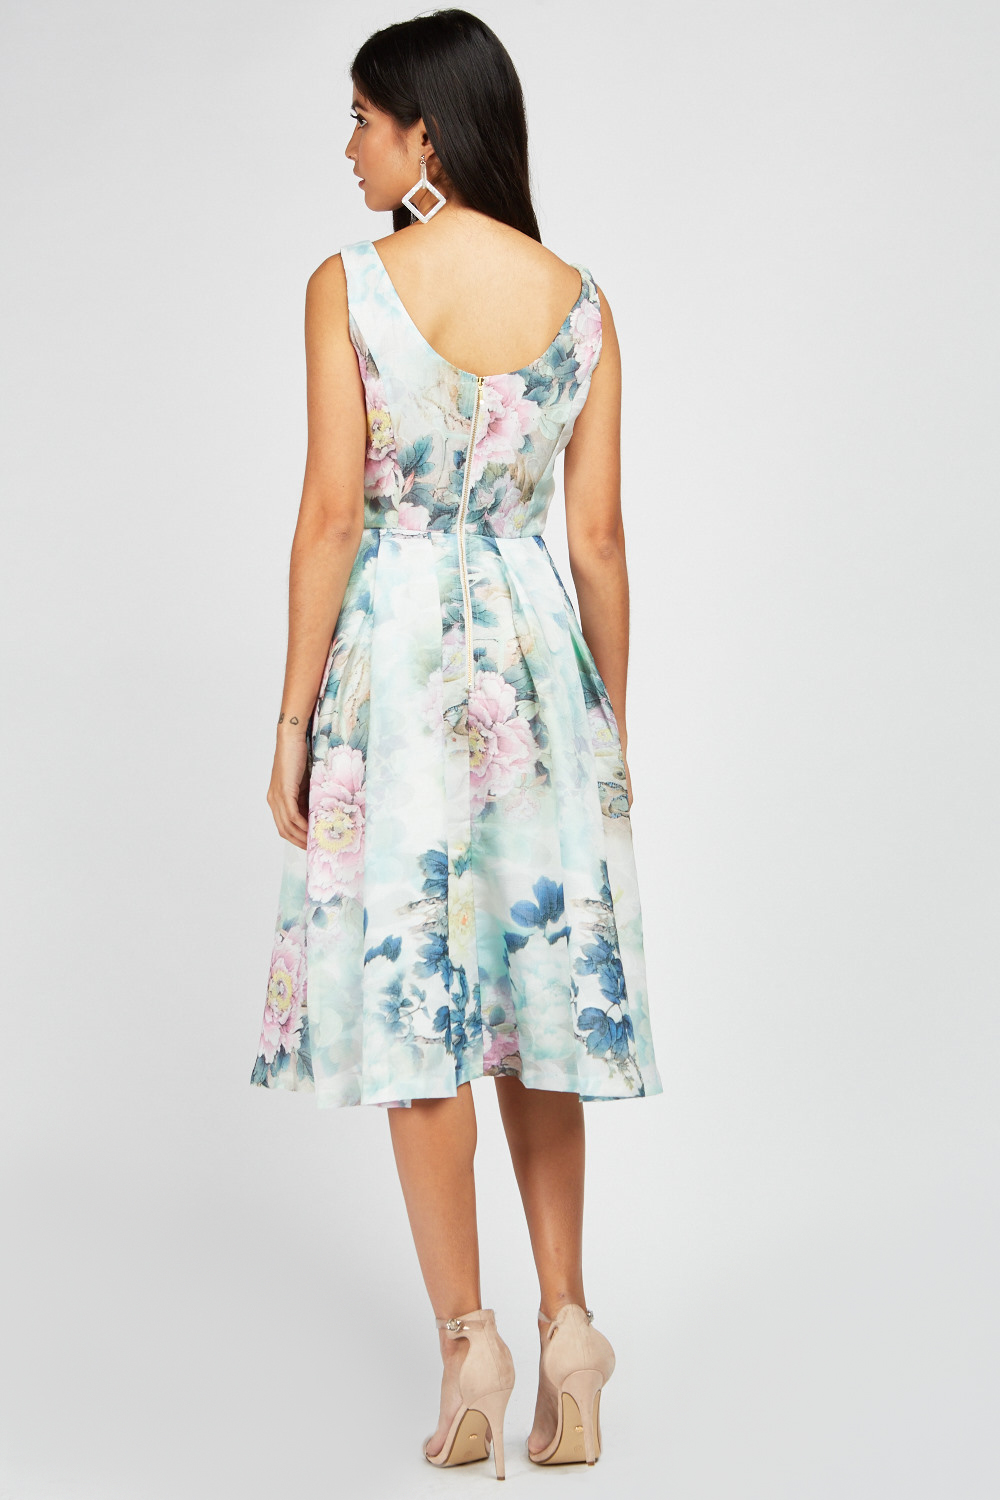 Jolie Moi Box Pleated Floral Dress - Just $3